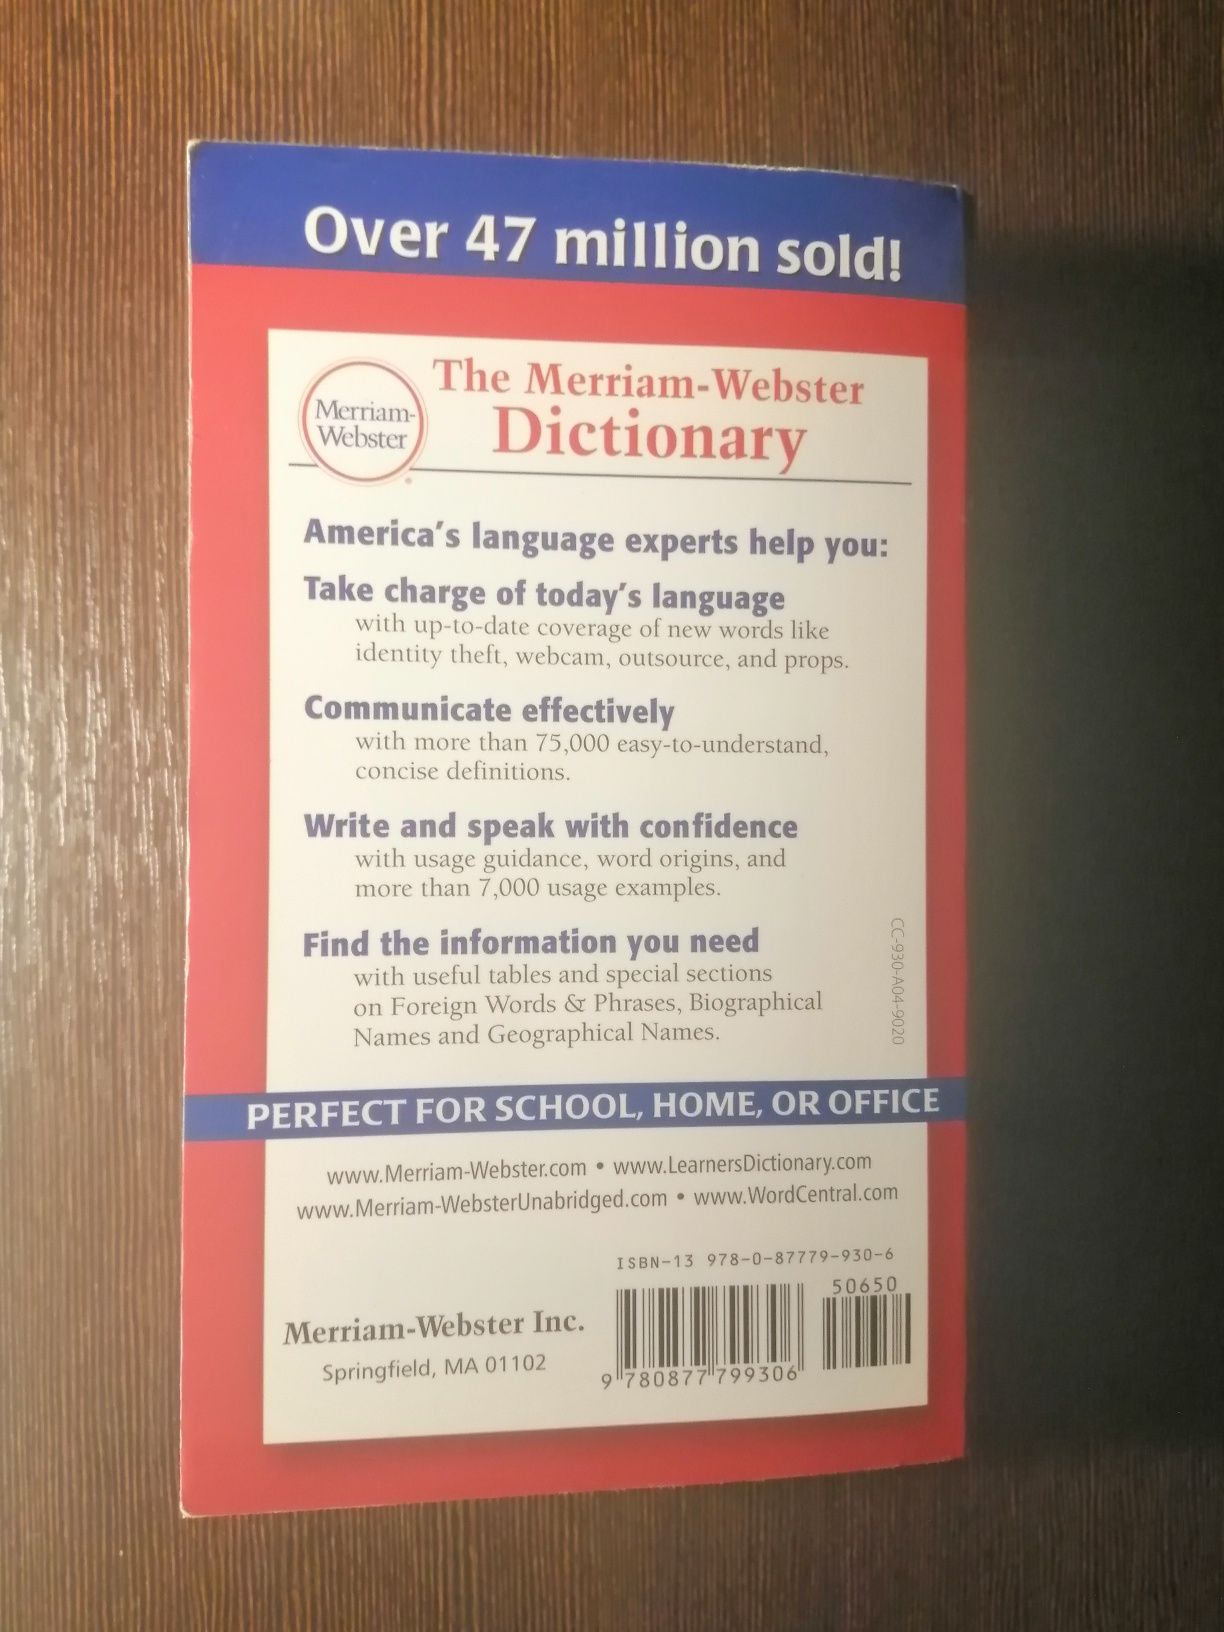 The merriam webster dictionary